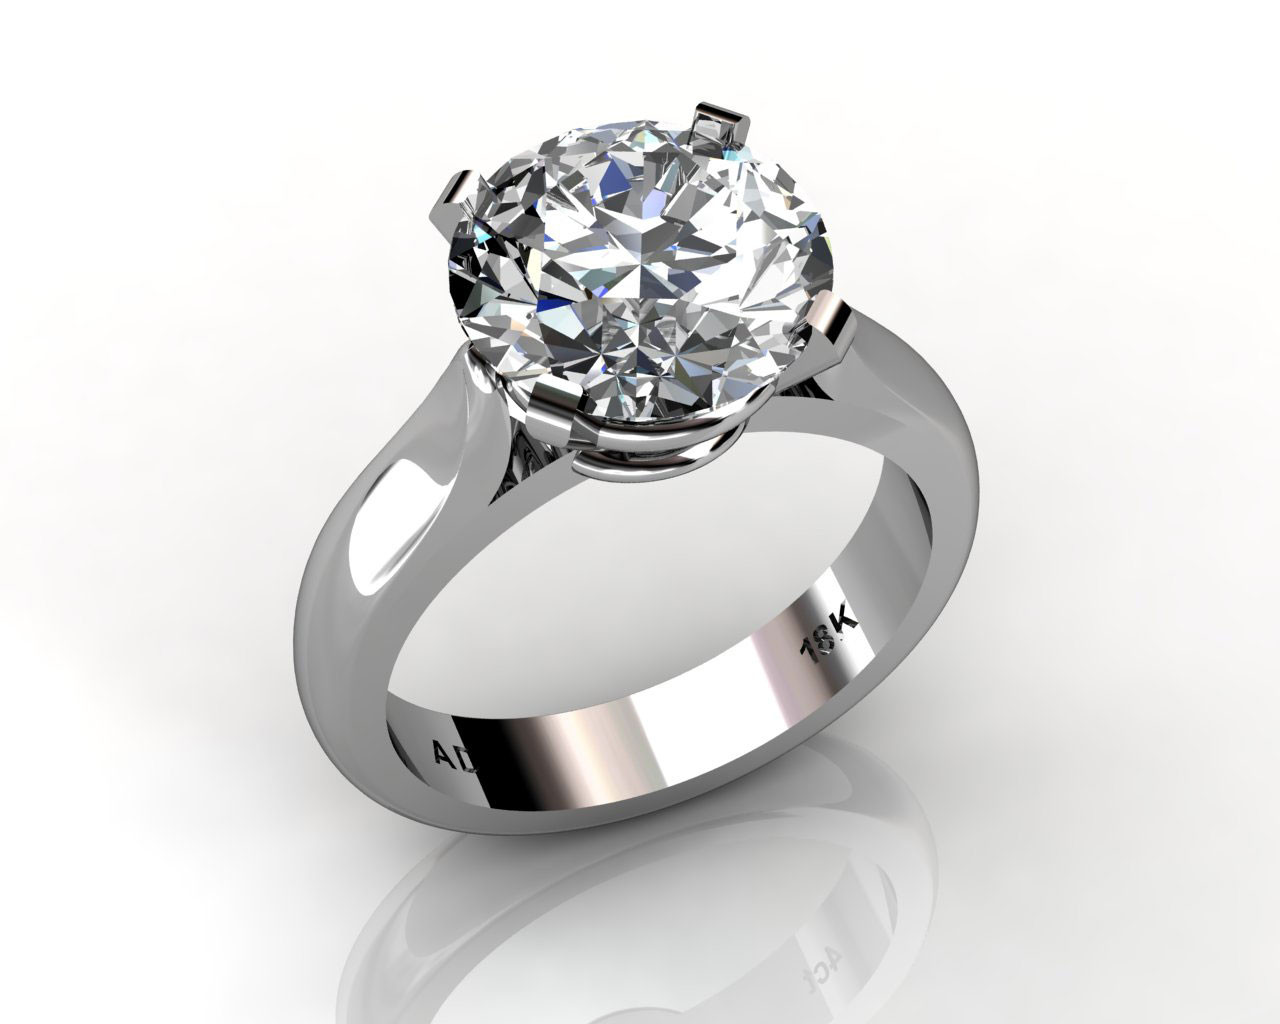 Round Diamond Solitaire Engagement Ring
 Custom Jewelry Design South Bay Gold